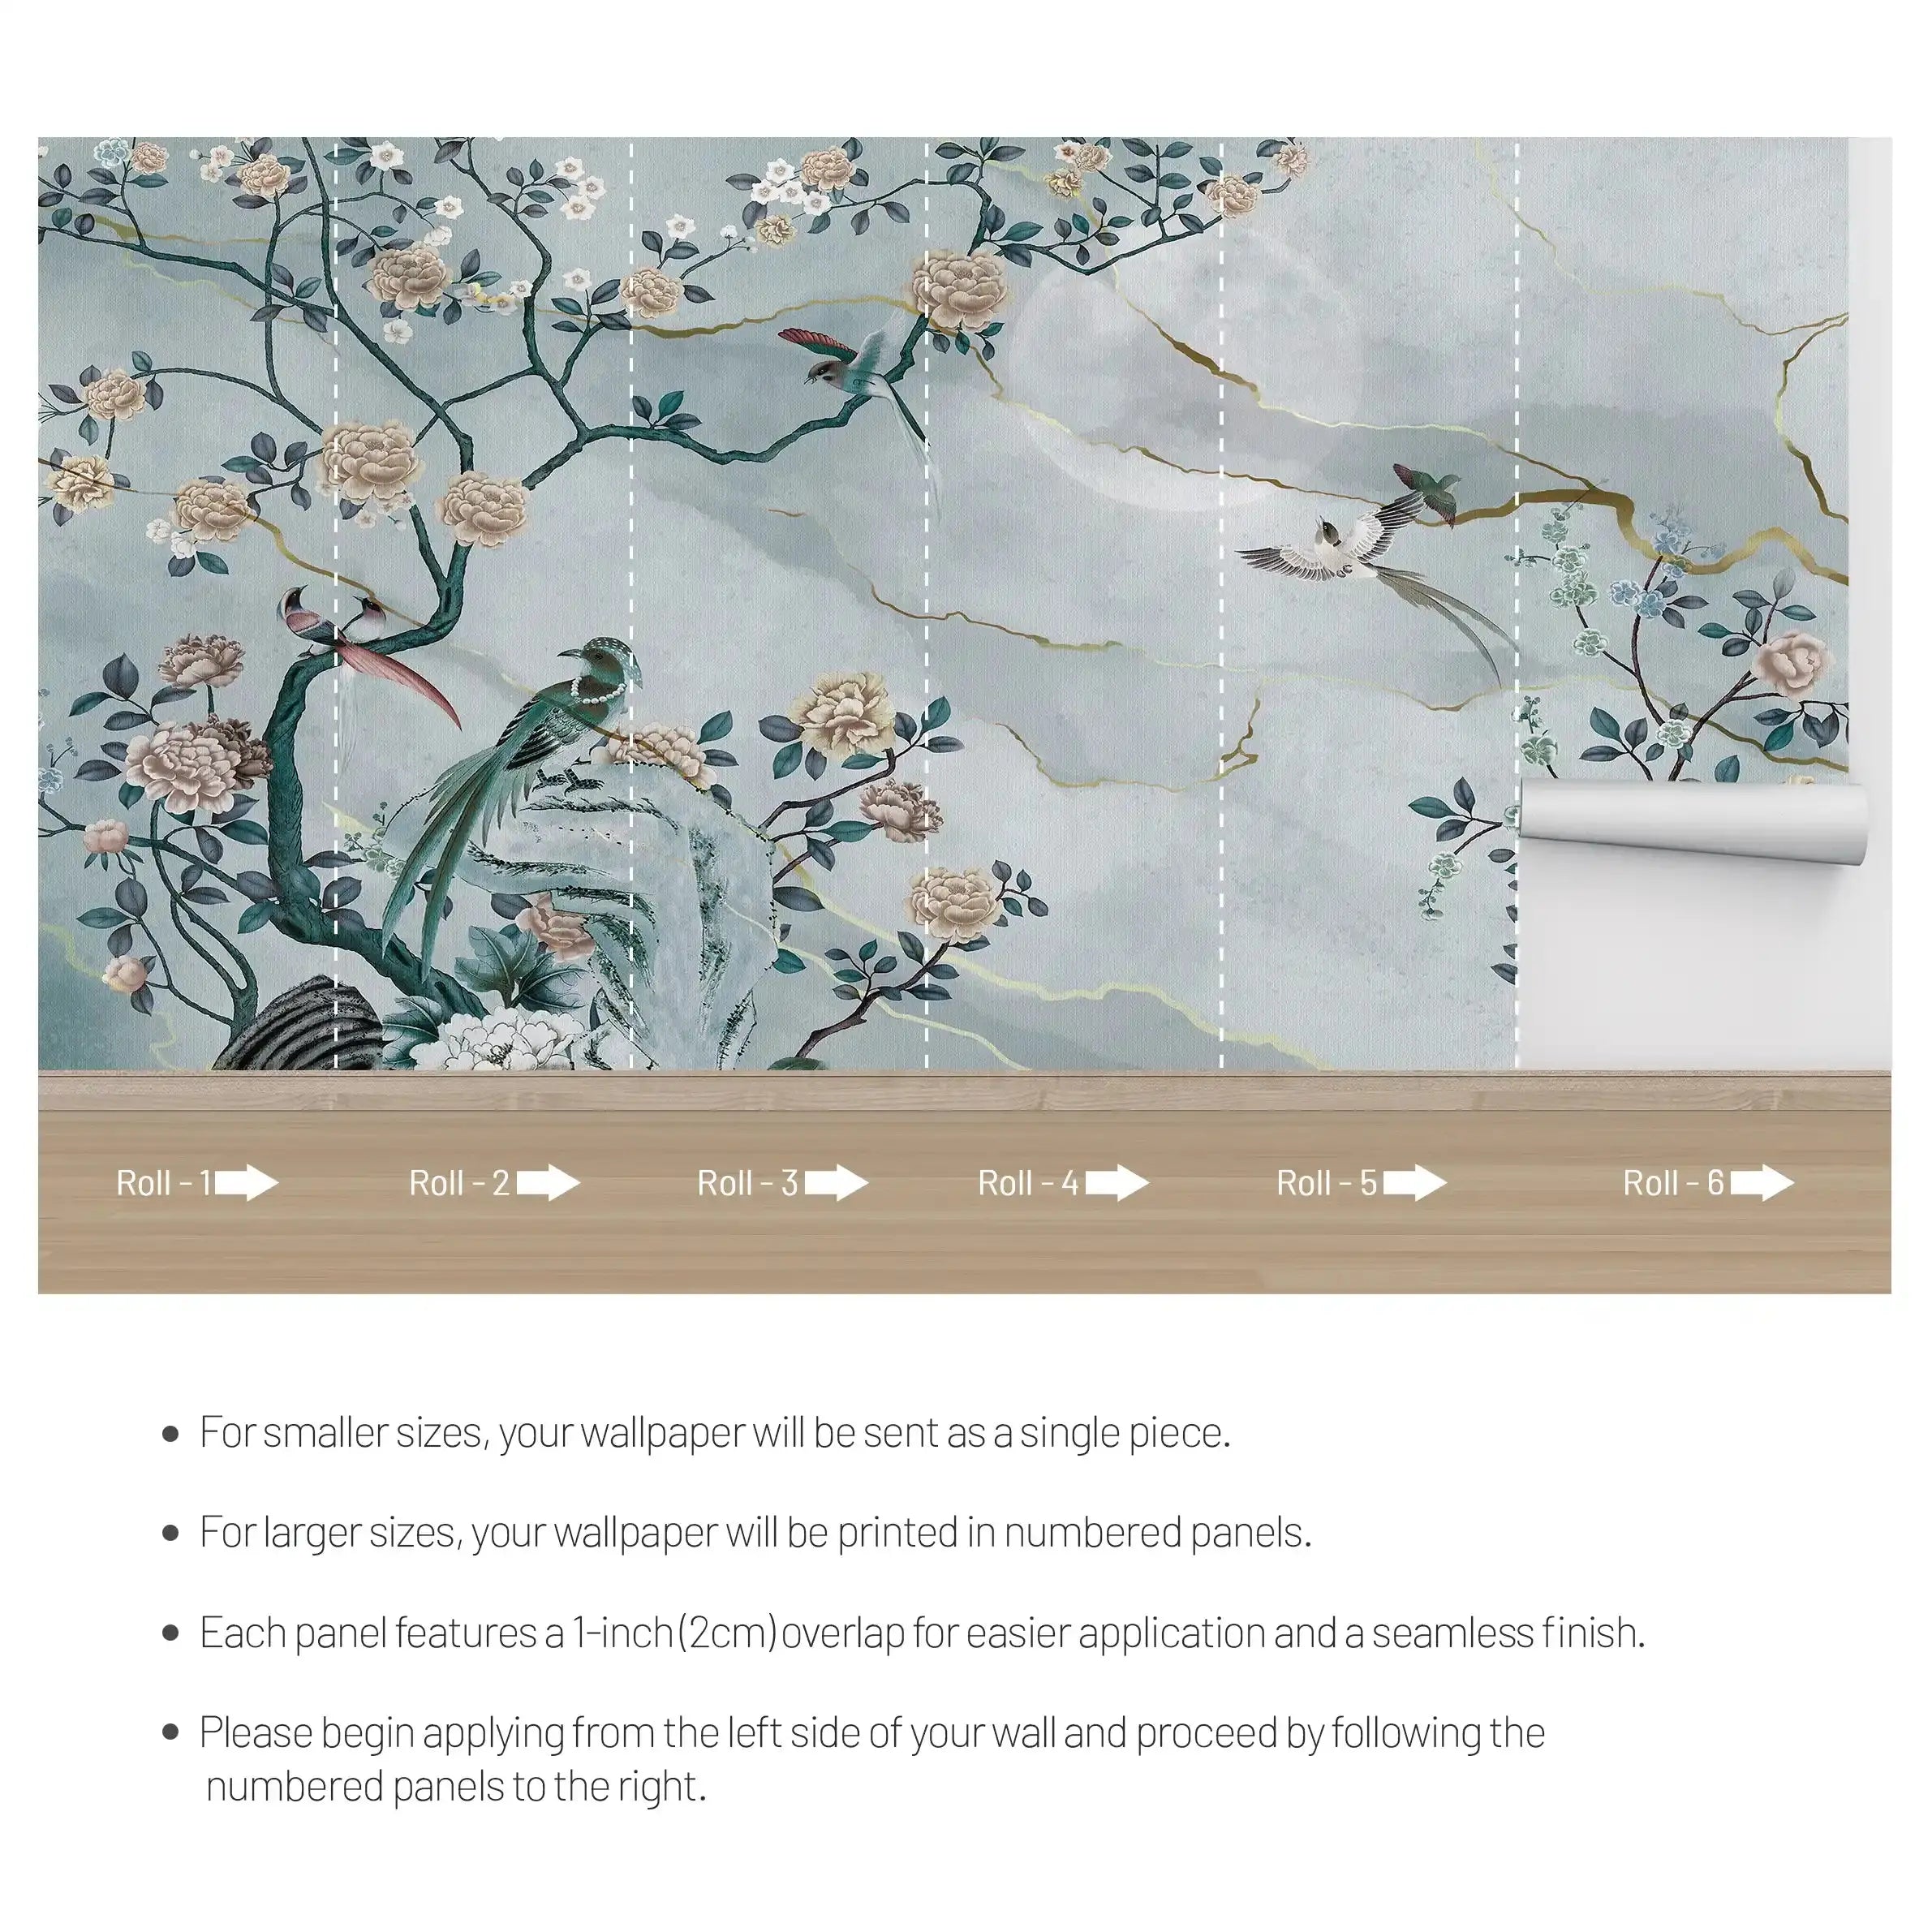 3055-C / Removable Wallpaper Peel and Stick - Chinese Painting, Vintage Floral Mural, Birds Natural Design, Easy Install, Boho Style - Artevella